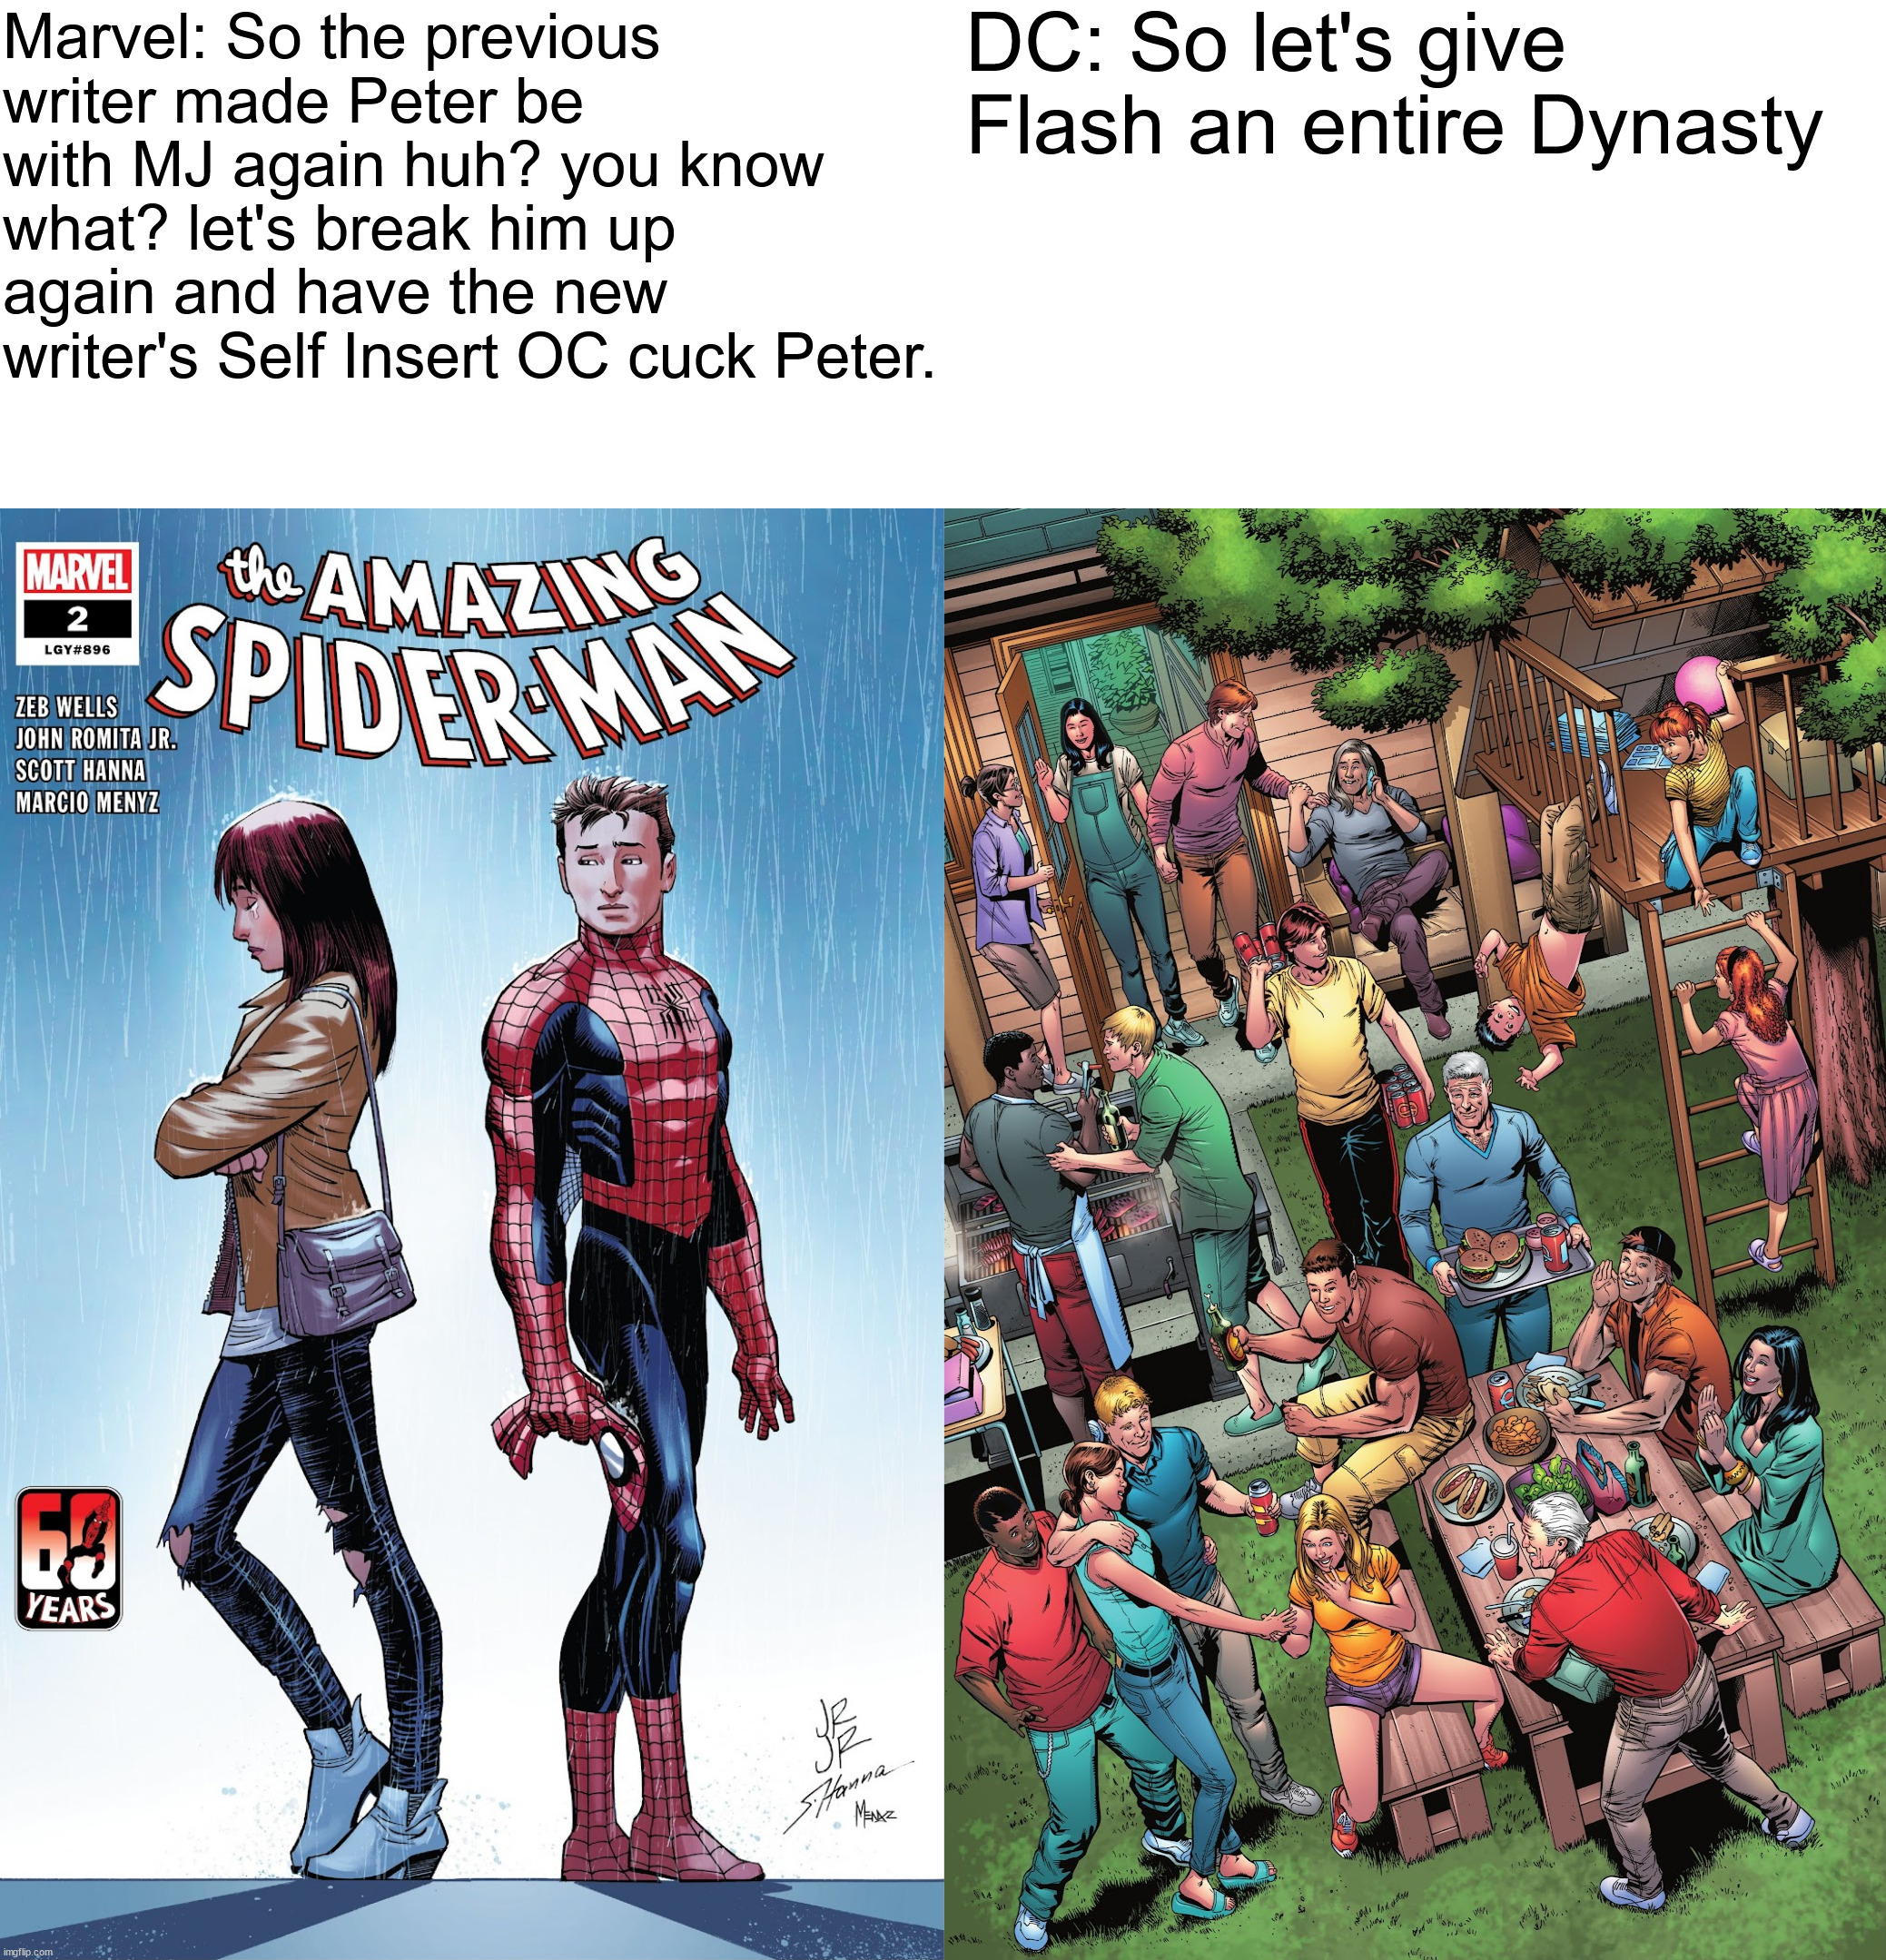 Being a Spider-Man comic fan is a Pain | DC: So let's give Flash an entire Dynasty; Marvel: So the previous writer made Peter be with MJ again huh? you know what? let's break him up again and have the new writer's Self Insert OC cuck Peter. | image tagged in the flash,spider-man | made w/ Imgflip meme maker